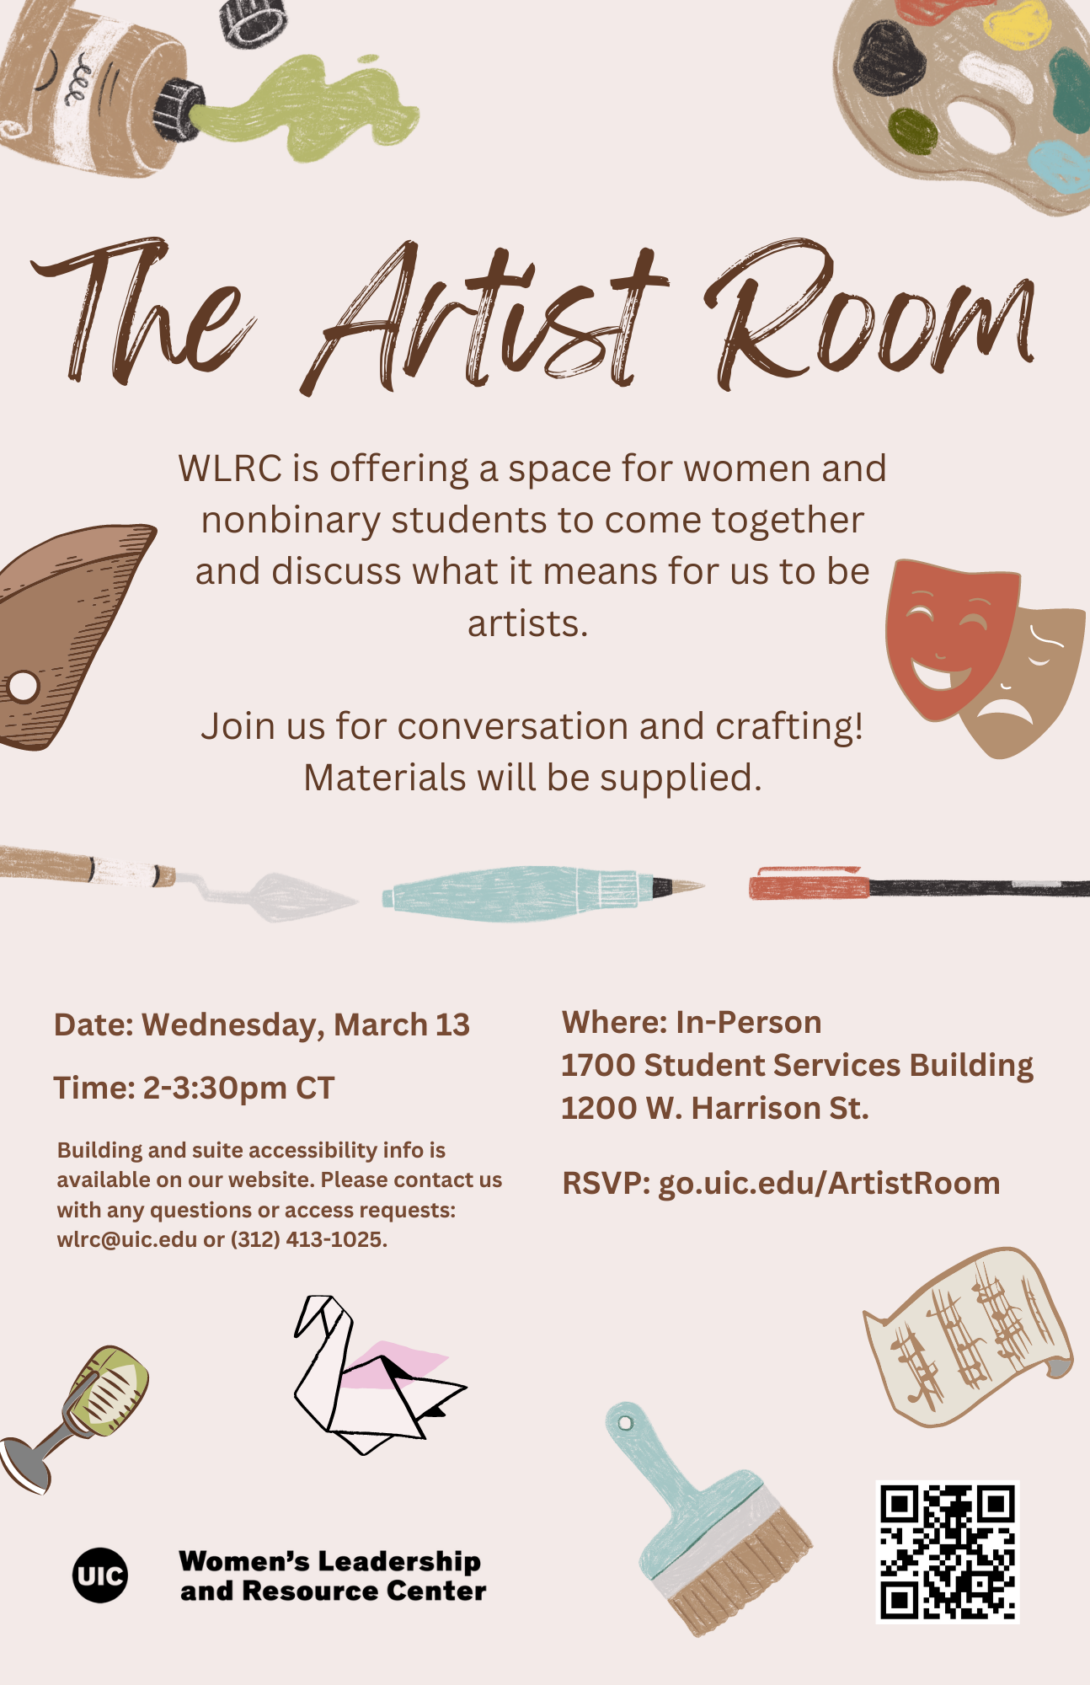 Promotional poster: A variety of art-related items, including paint, a palette, theatre masks, brushes, sheet music, a microphone, and an origami crane, scattered around the edges. In the center is text describing the Artist Room event (same info on this page).